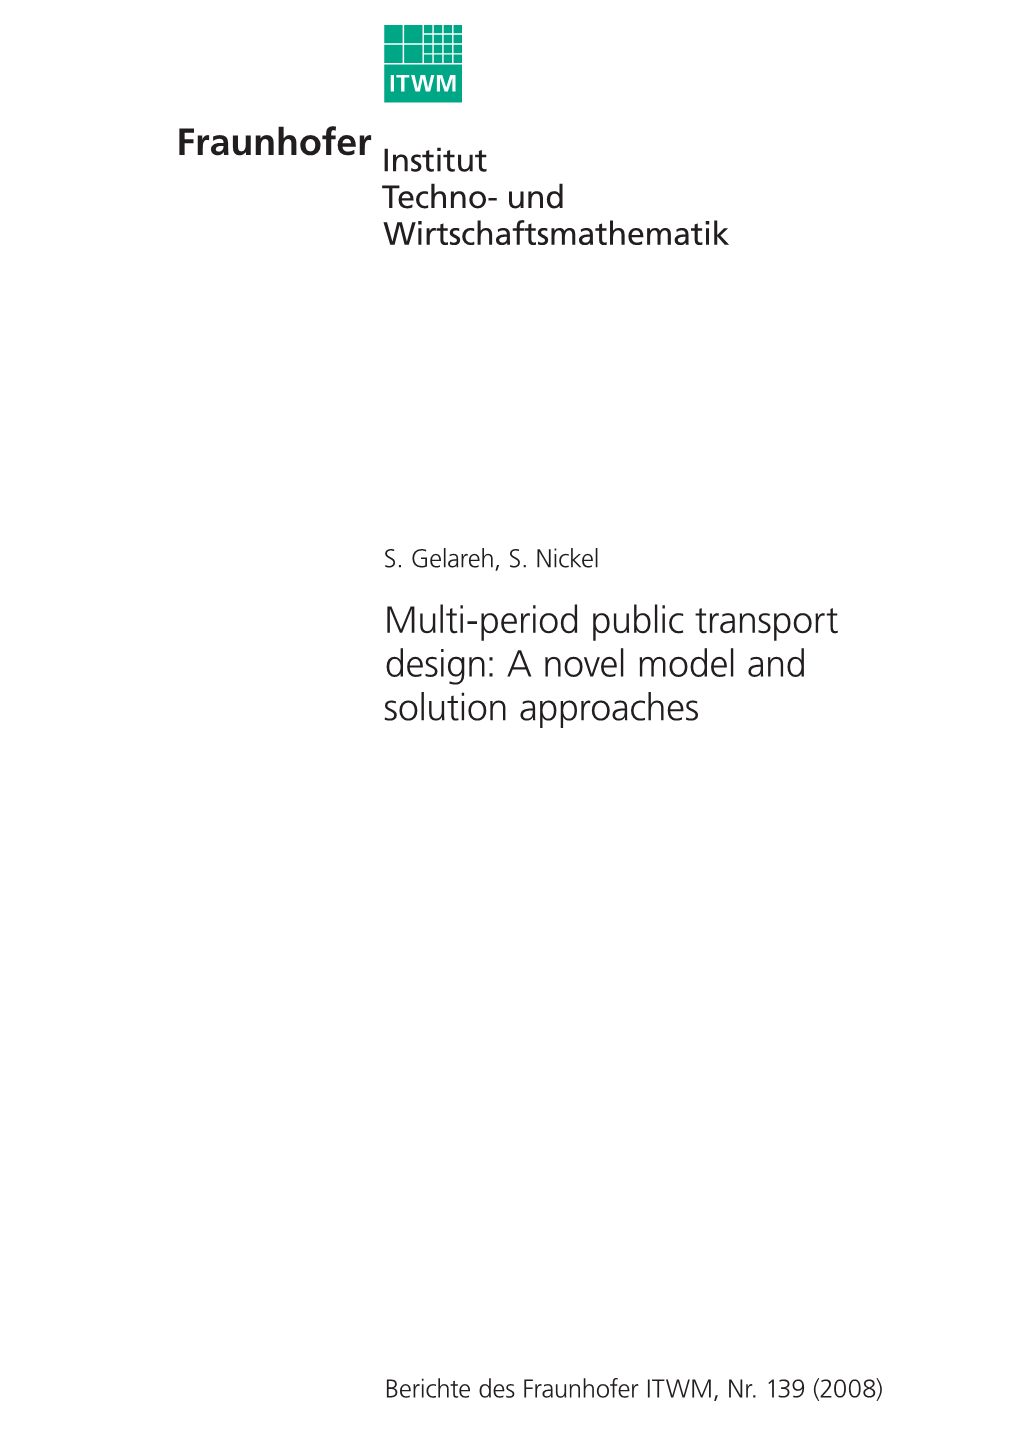 Multi-Period Public Transport Design: a Novel Model and Solution Approaches